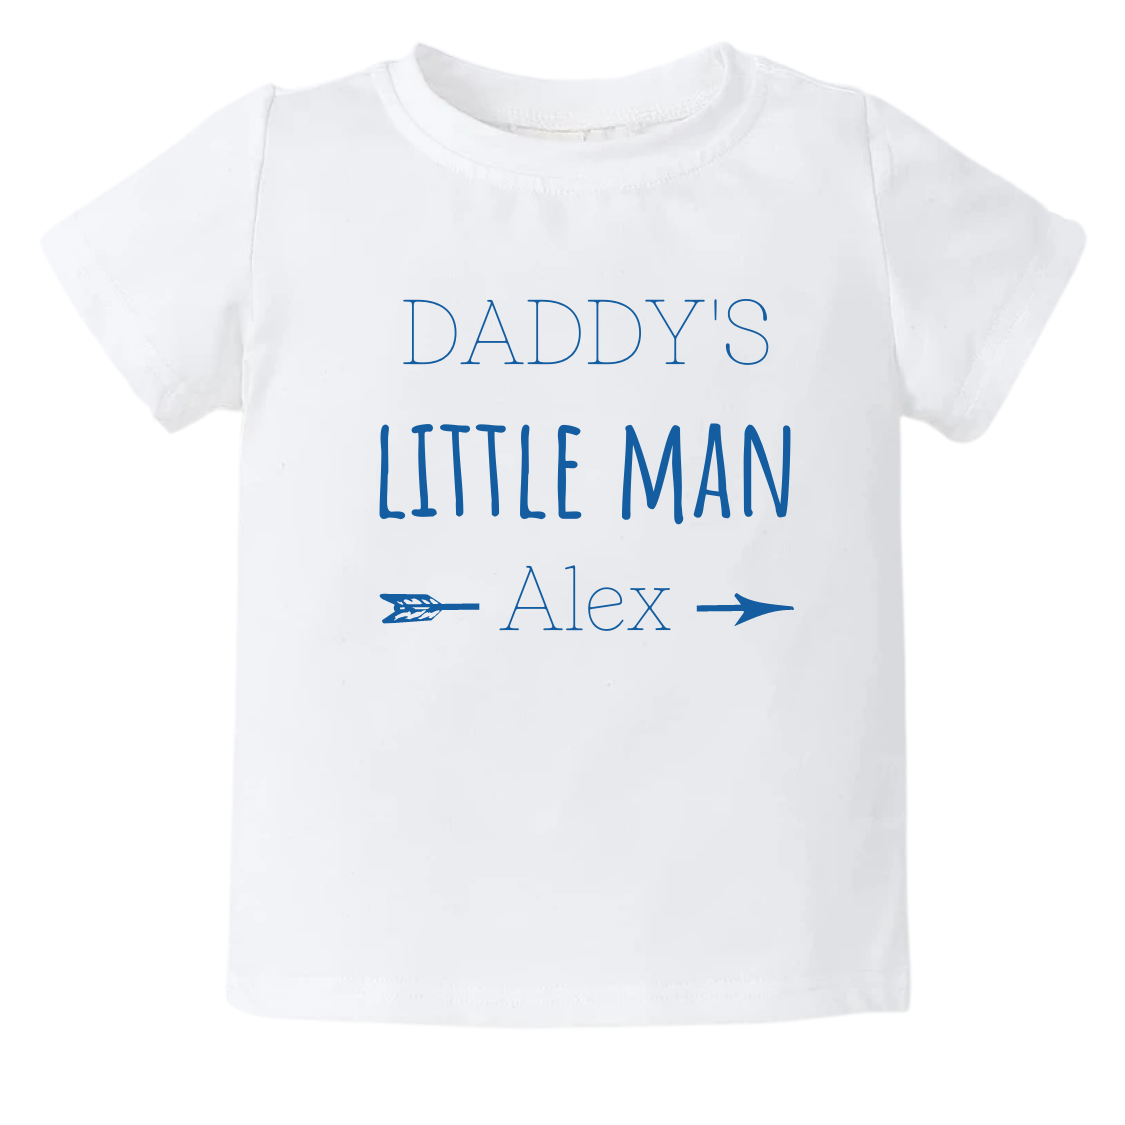 Kid's t-shirt with customizable name option and the text 'Daddy's Little Man'.